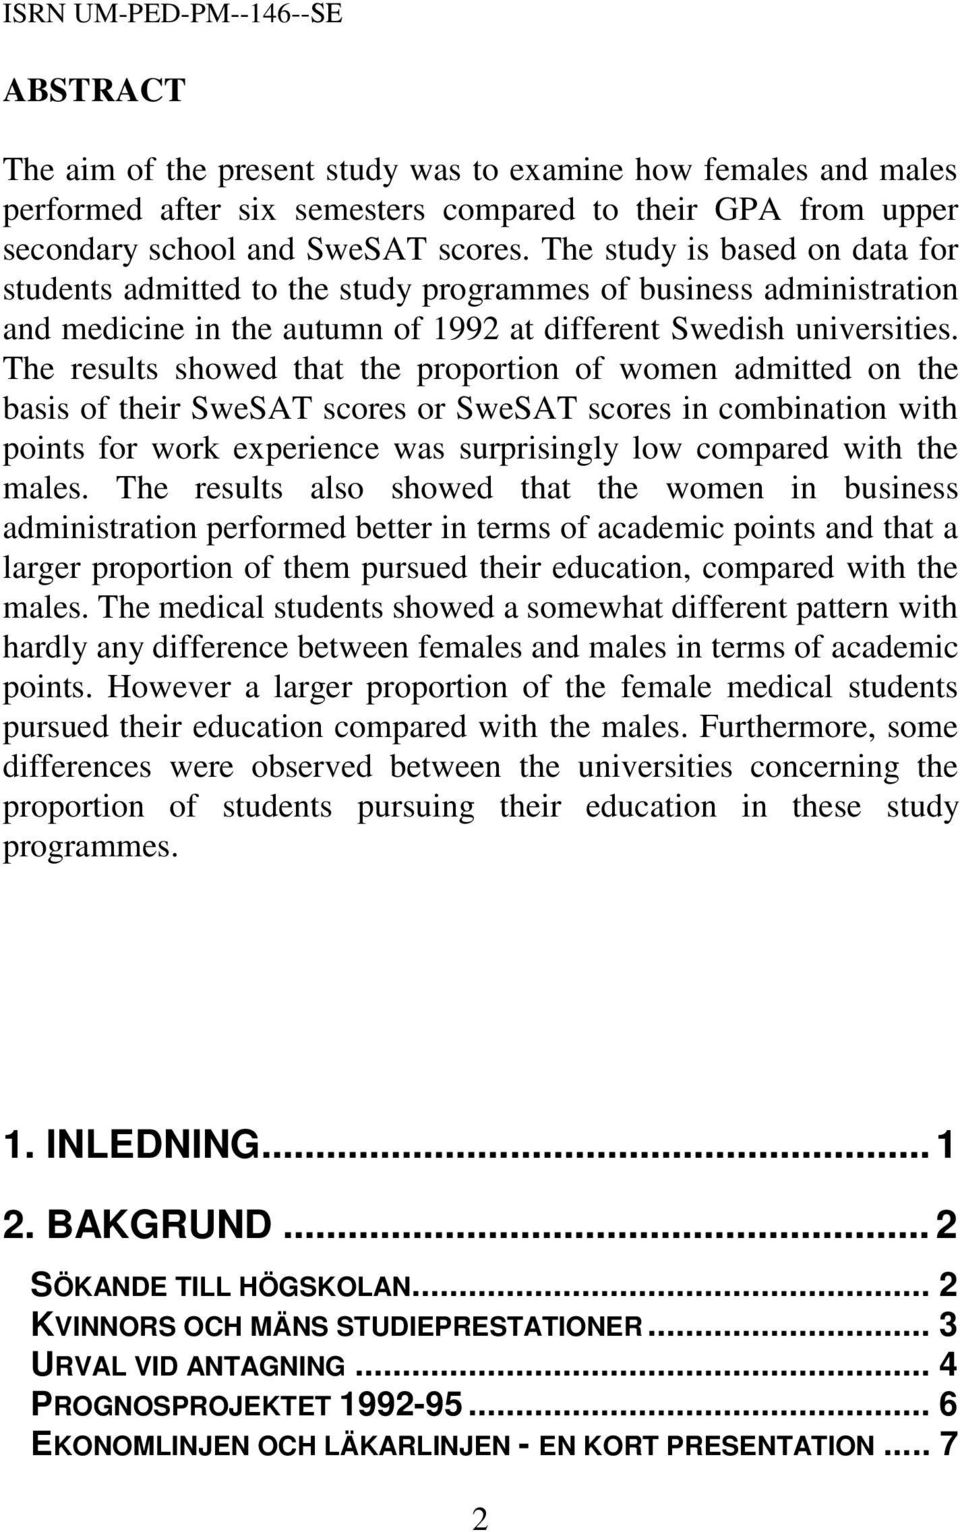 The results showed that the proportion of women admitted on the basis of their SweSAT scores or SweSAT scores in combination with points for work experience was surprisingly low compared with the